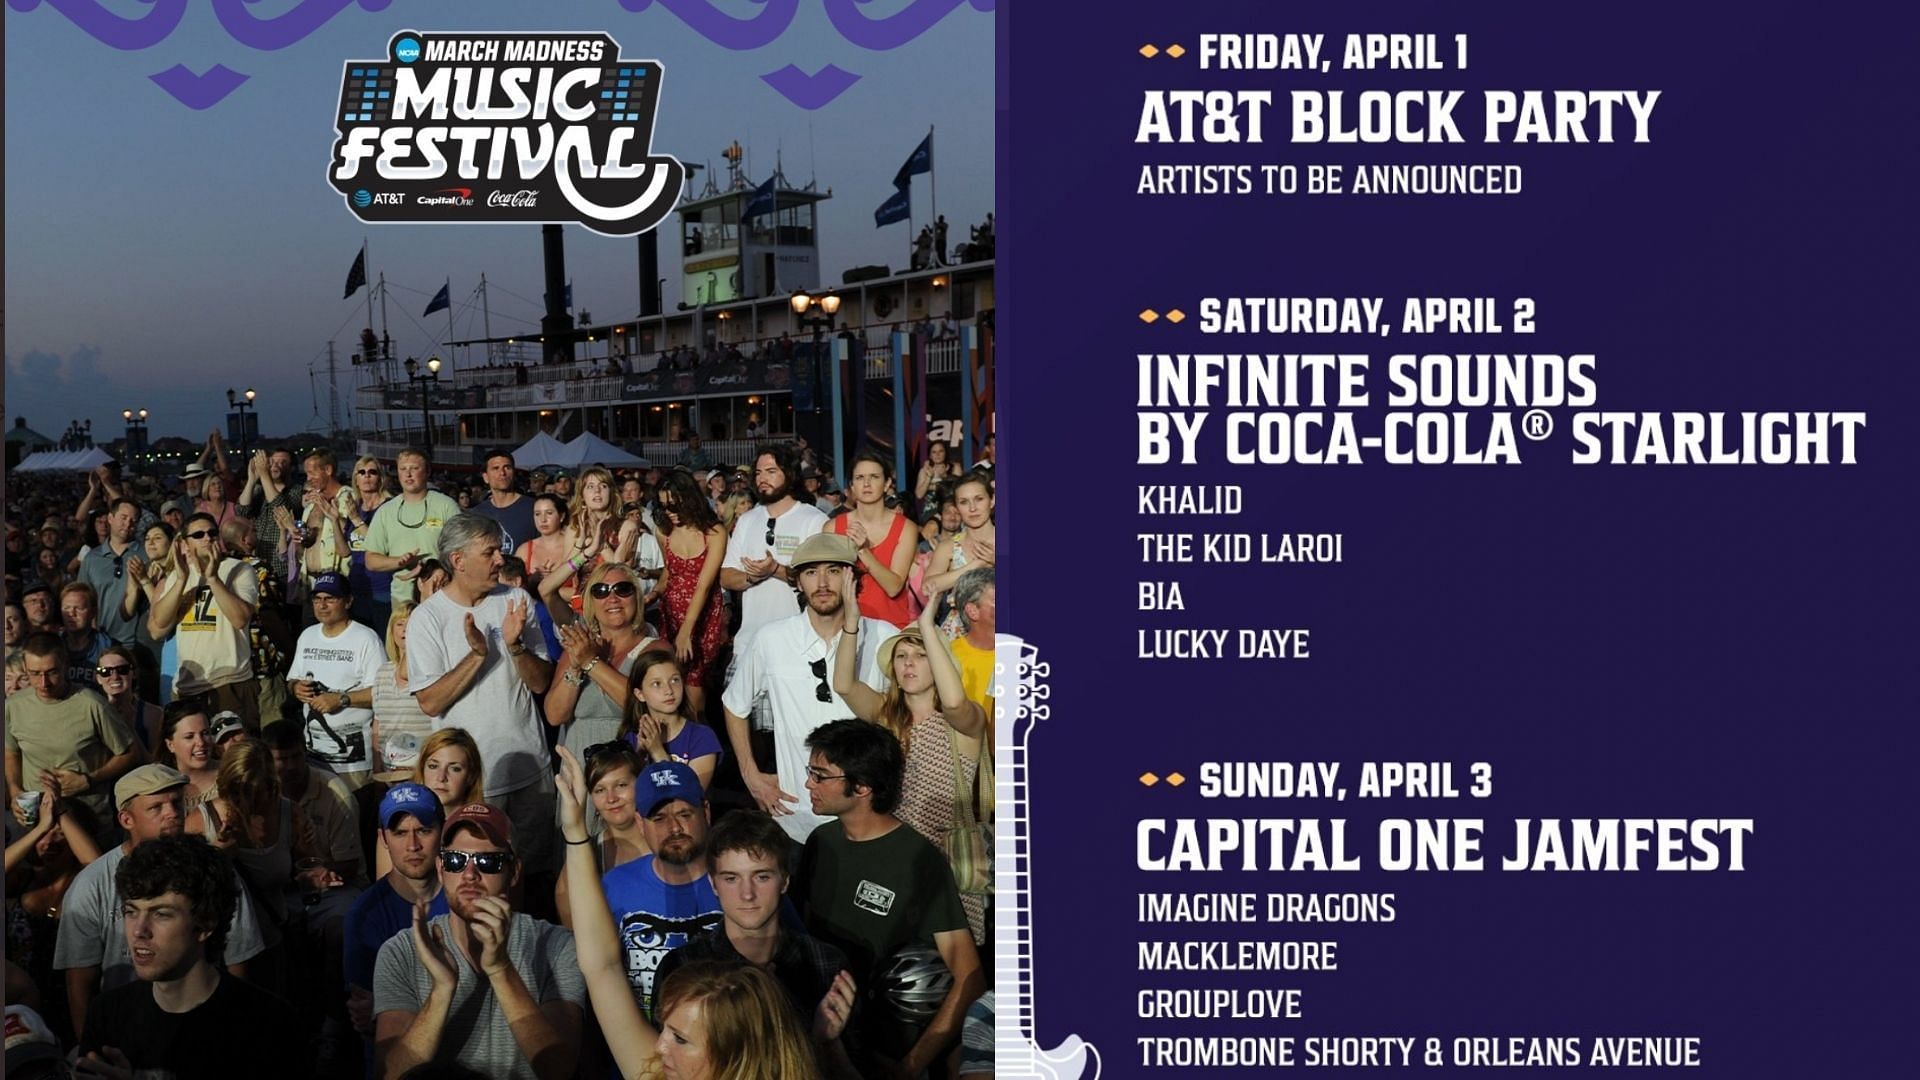 The NCAA March Madness Music Festival slated for the first three days of April this year (Images via Twitter /MFinalFour)